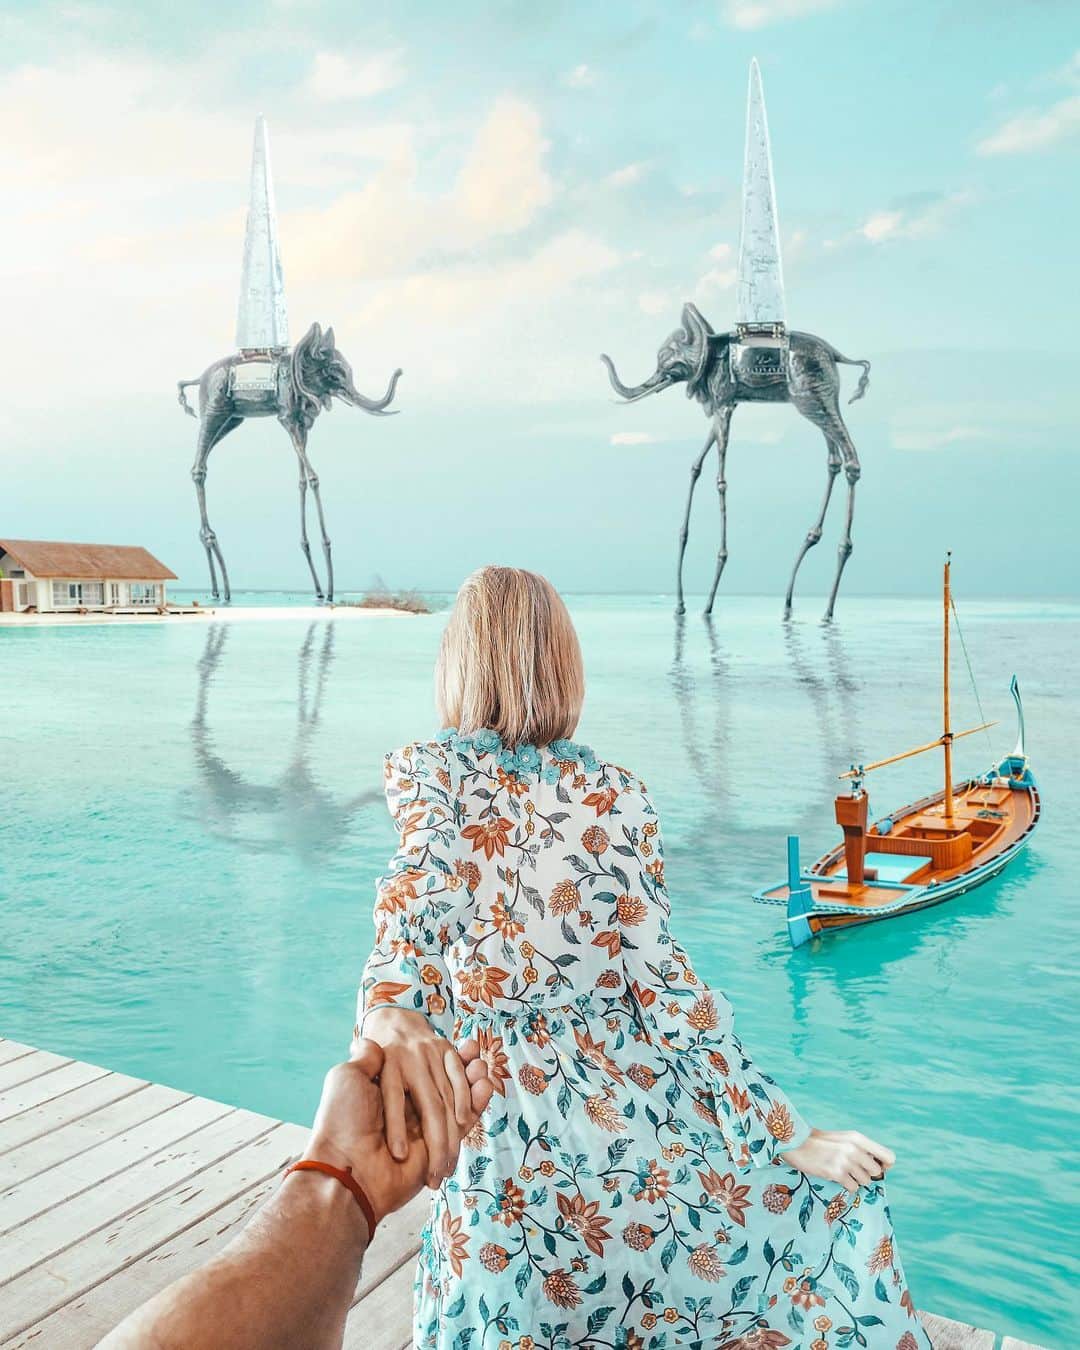 Murad Osmannのインスタグラム：「#followmeto the imaginary world of Dali, come with me and @natalyosmann.  Salvador Dali’s extraordinary creativity has left its mark throughout many elements of culture and curiosity within todays society.  My initial inspiration behind this image is from the Space Elephant sculpture which you can see in the @dali_paris_officiel!  Which reopens on the 10th of June! ❓What is your favourite artwork by Dali❓ #unleashyourcreativity @honorglobal 💻: #HONORMagicBookSeries #Windows10Home 🇷🇺Следуйзамной в воображаемый мир Дали. Исключительное творчество Сальвадора Дали оставило свой след во многих элементах культуры. Какая у вас любимая работа Дали?」